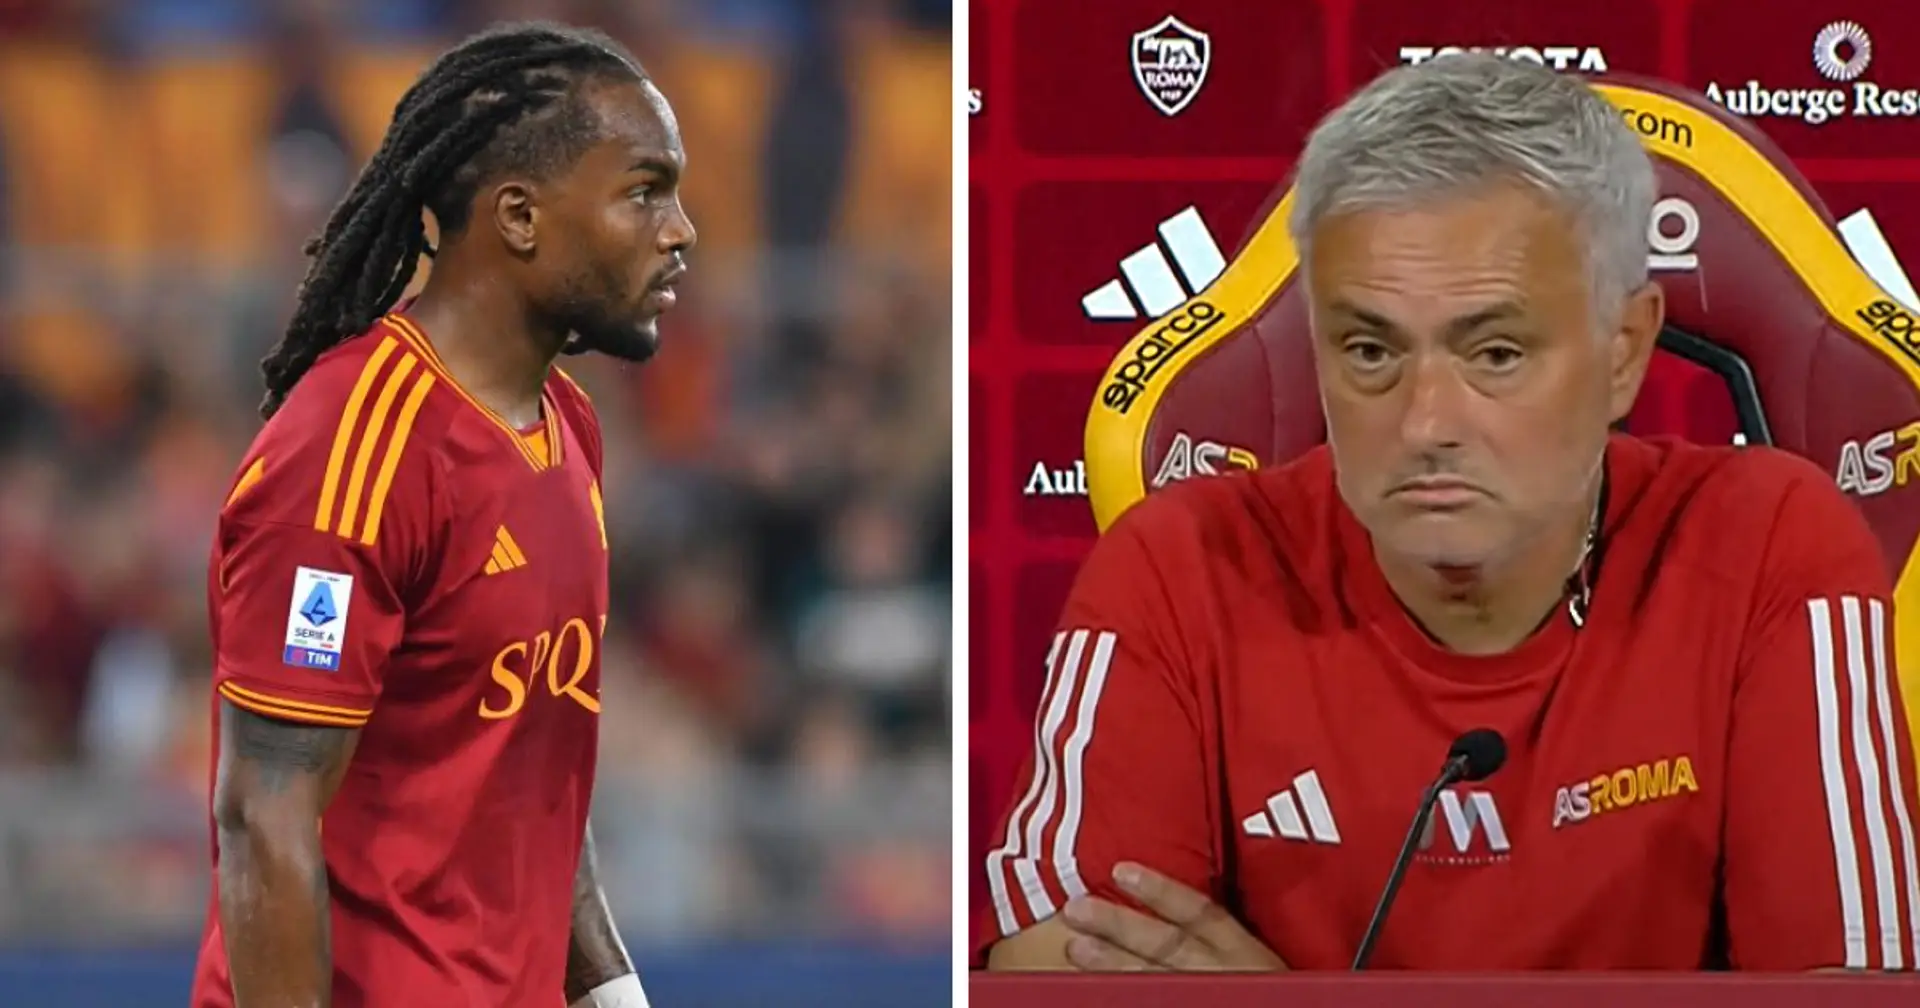 'It's difficult to understand': Jose Mourinho on Renato Sanches being injured all the time